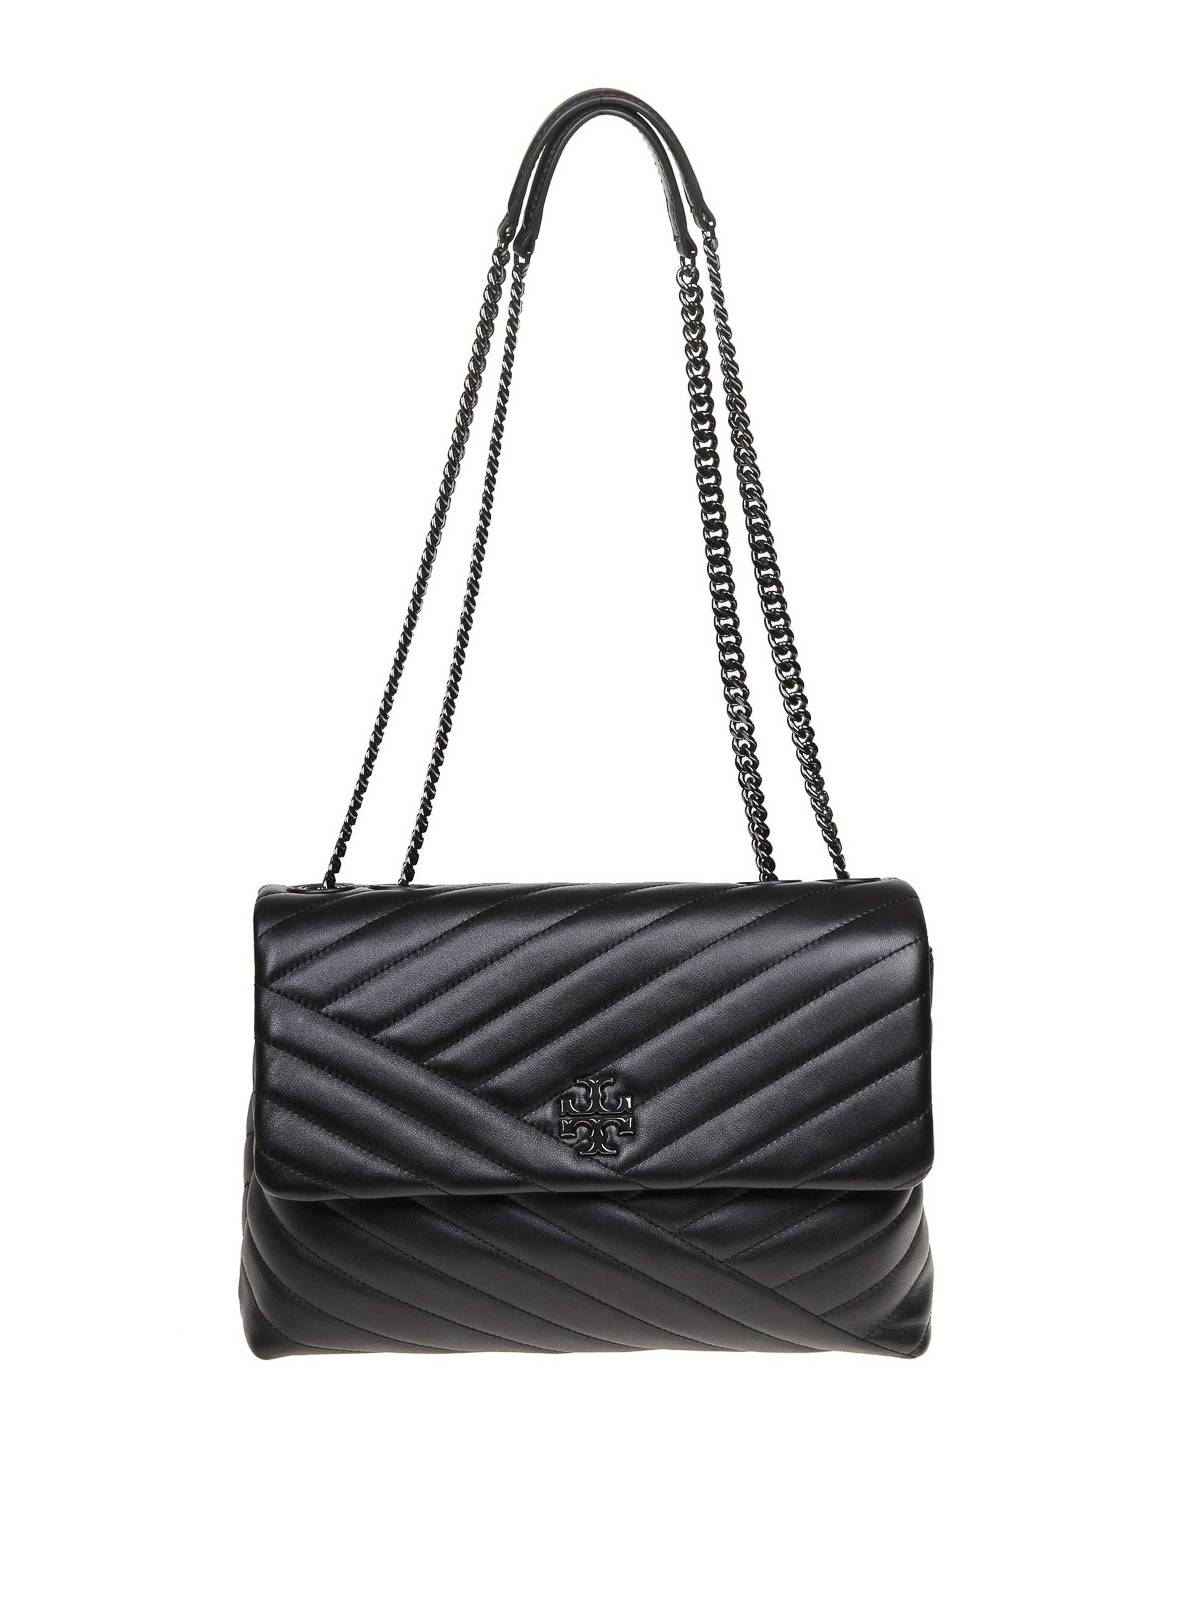 Tory Burch Kira Quilted Leather Cross Body Bag in Black